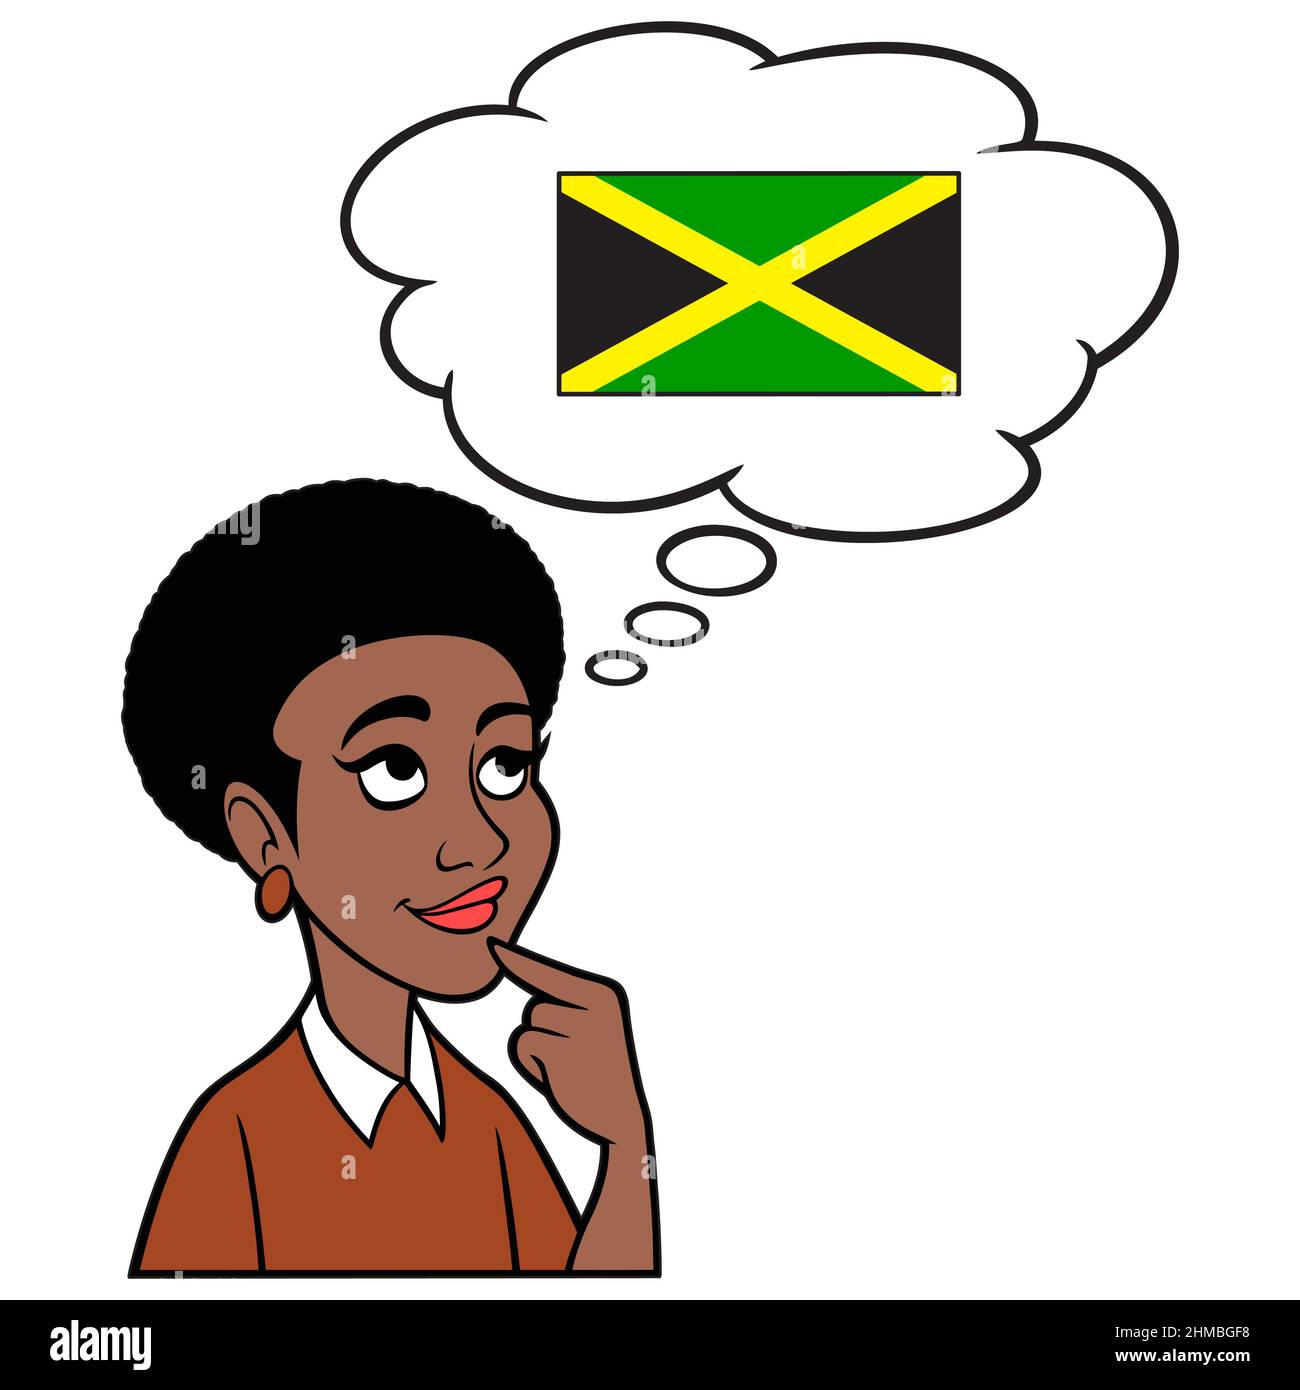 Black Woman thinking about Jamaica - A cartoon illustration of a Black Woman thinking about taking a vacation trip to Jamaica. Stock Vector